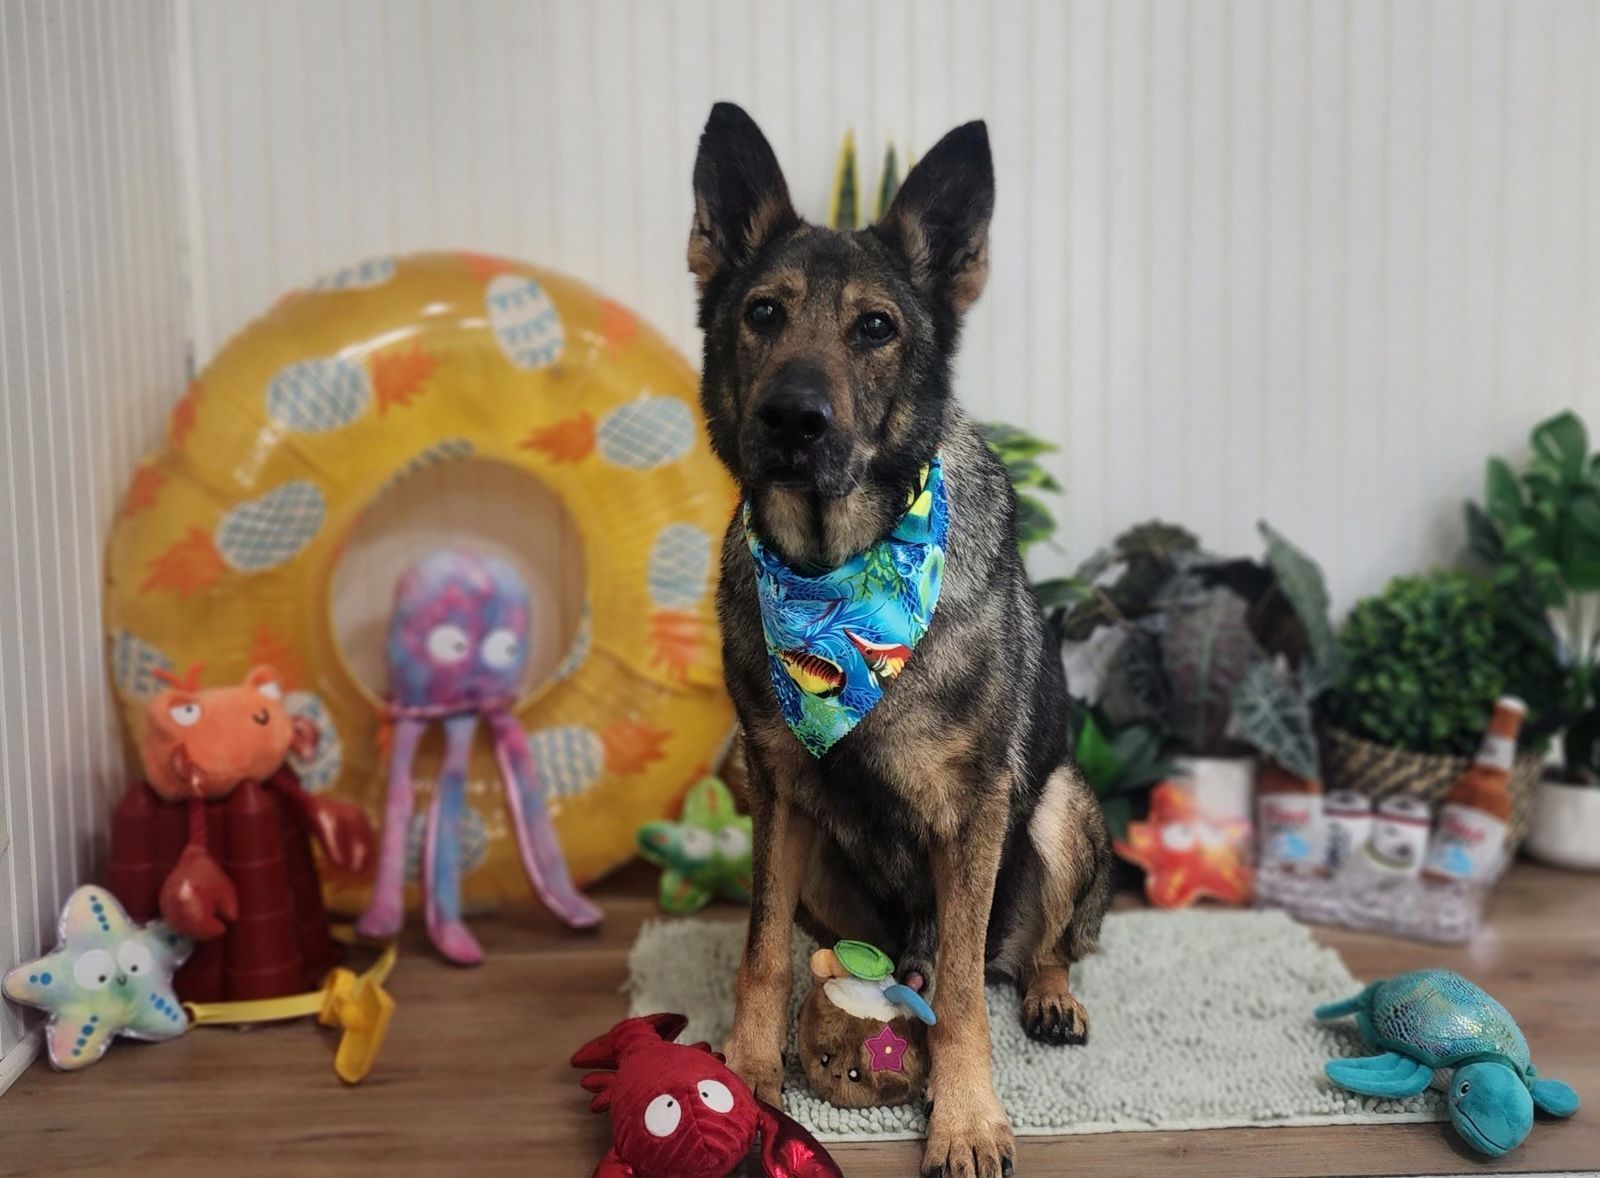 A dog wearing a bandana is sitting on a rug next to toys.